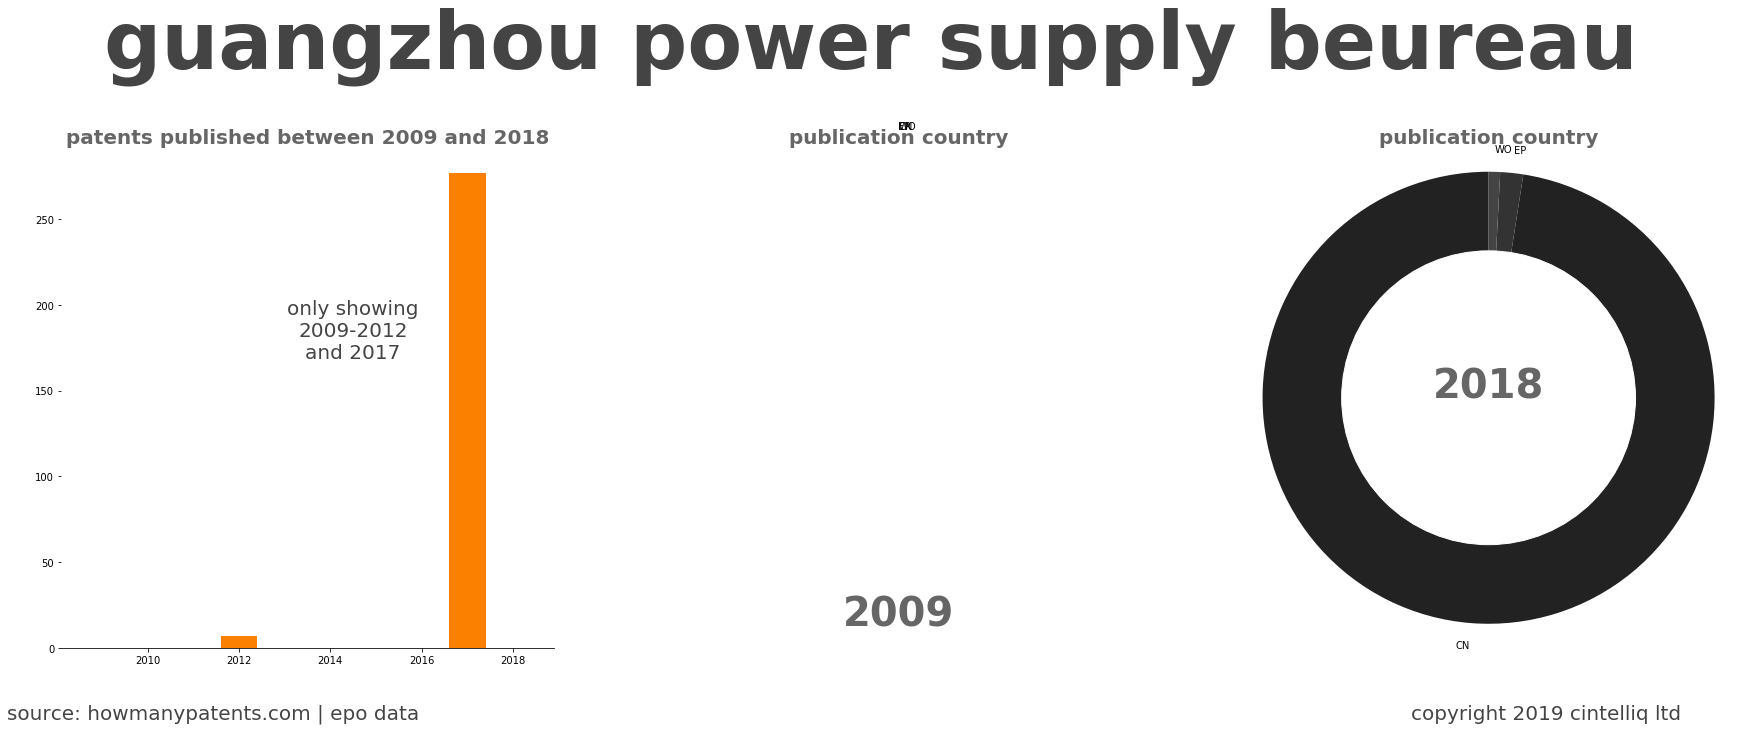 summary of patents for Guangzhou Power Supply Beureau